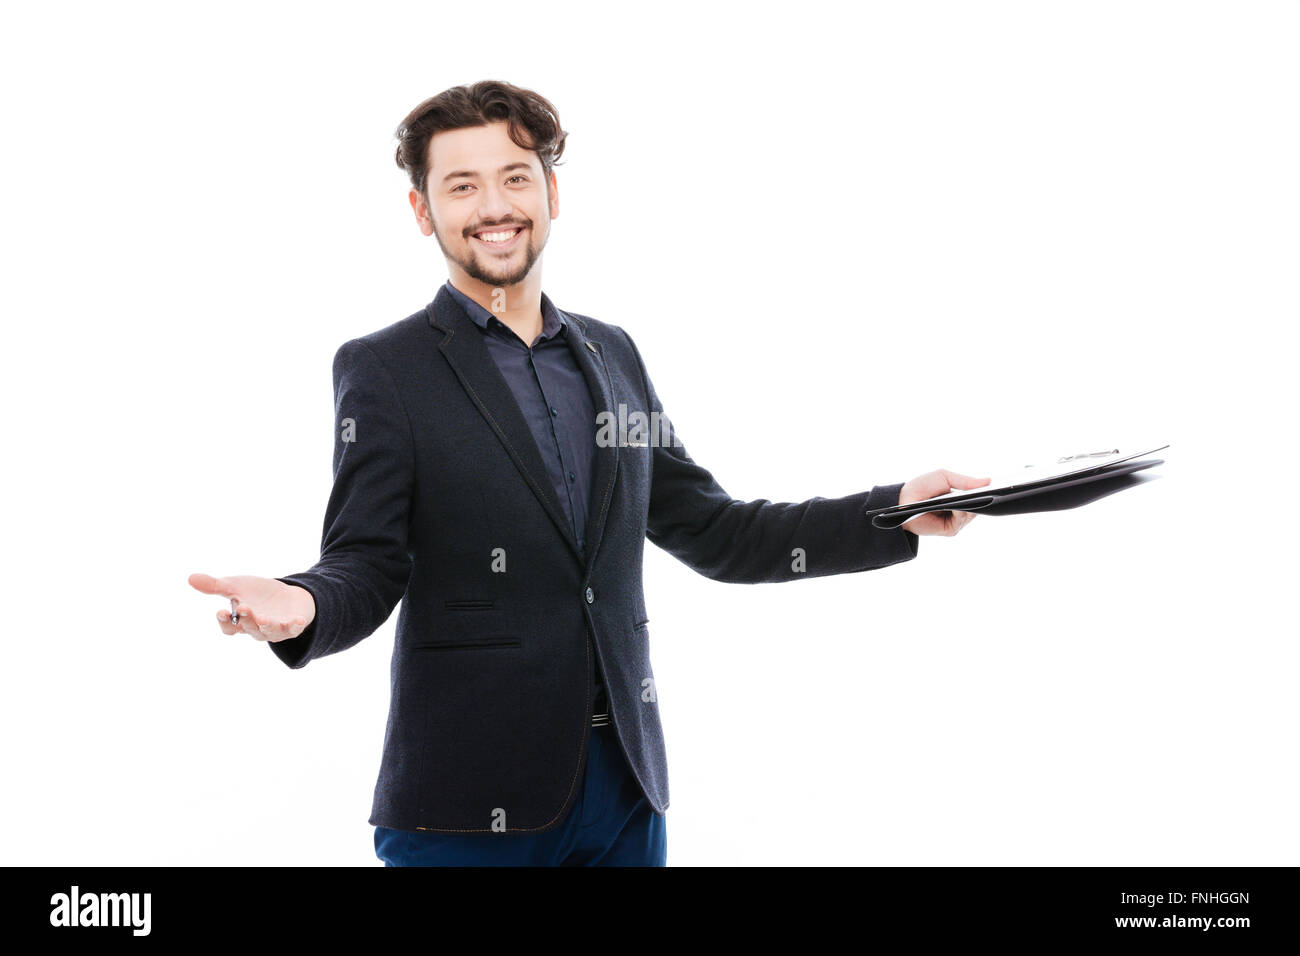 Cheerful businessman holding clipboard standing isolated on a white background Stock Photo